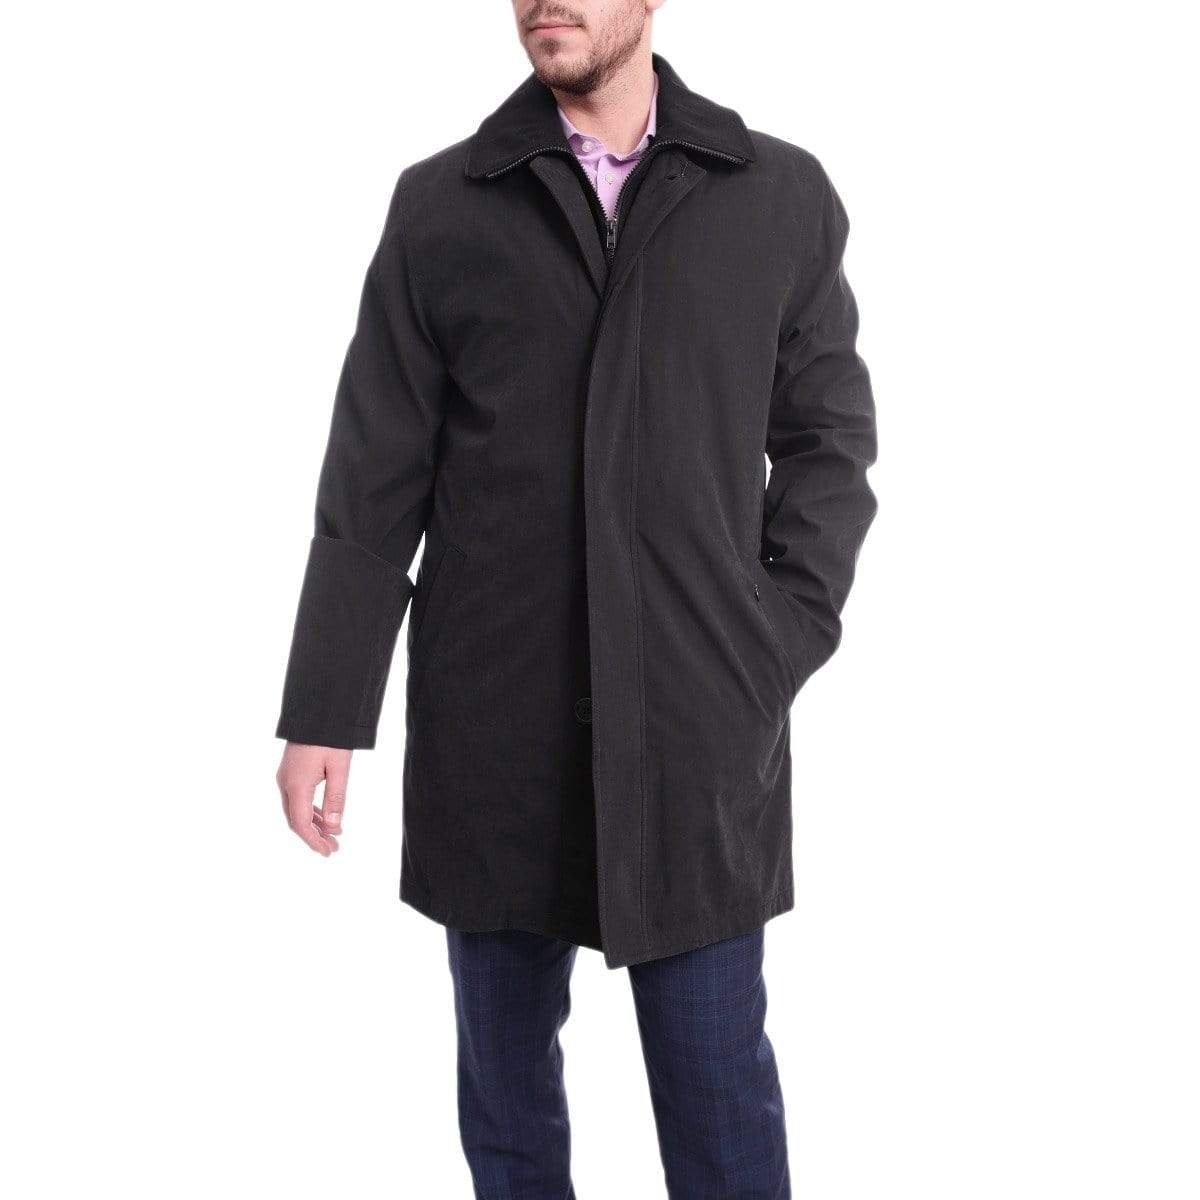 Cianni Cellini Dress Coats 36S Men's Rain-proof Iconic Black Trench Coat Jacket With Removable Liner